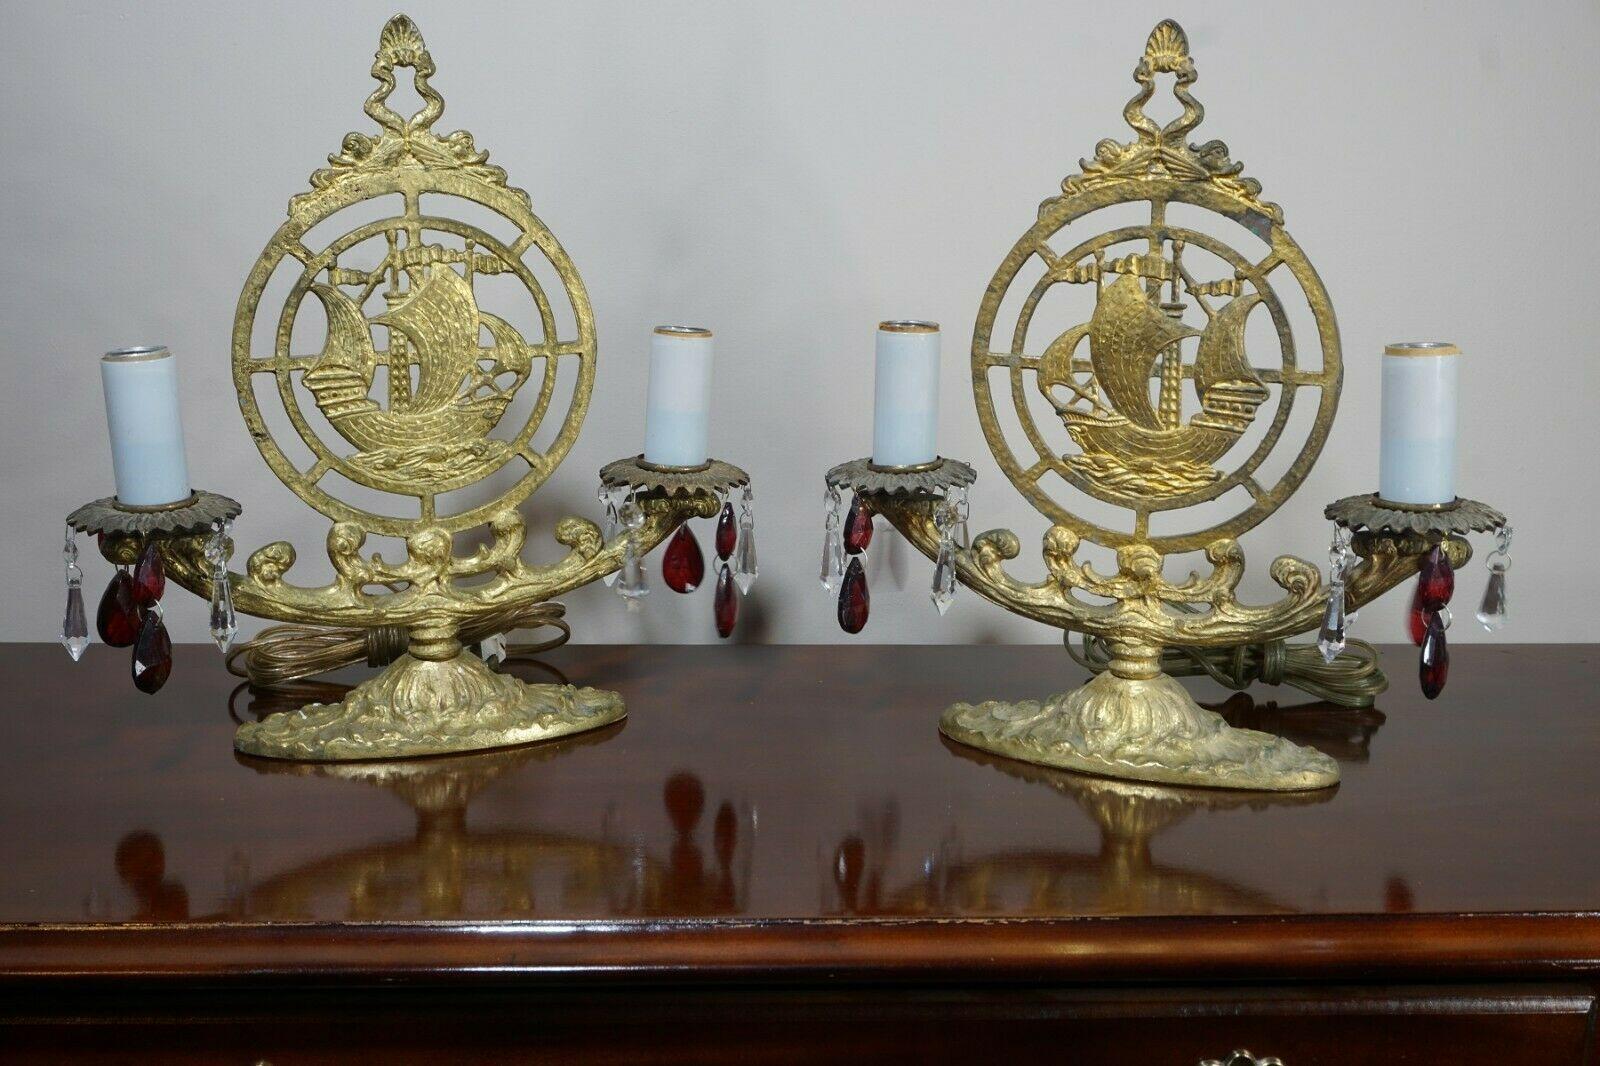 Beautiful Pair of Art Deco Bronze Nautical Ship Table Lamps. Crystal adorned. One ship faces right and one ship faces left.